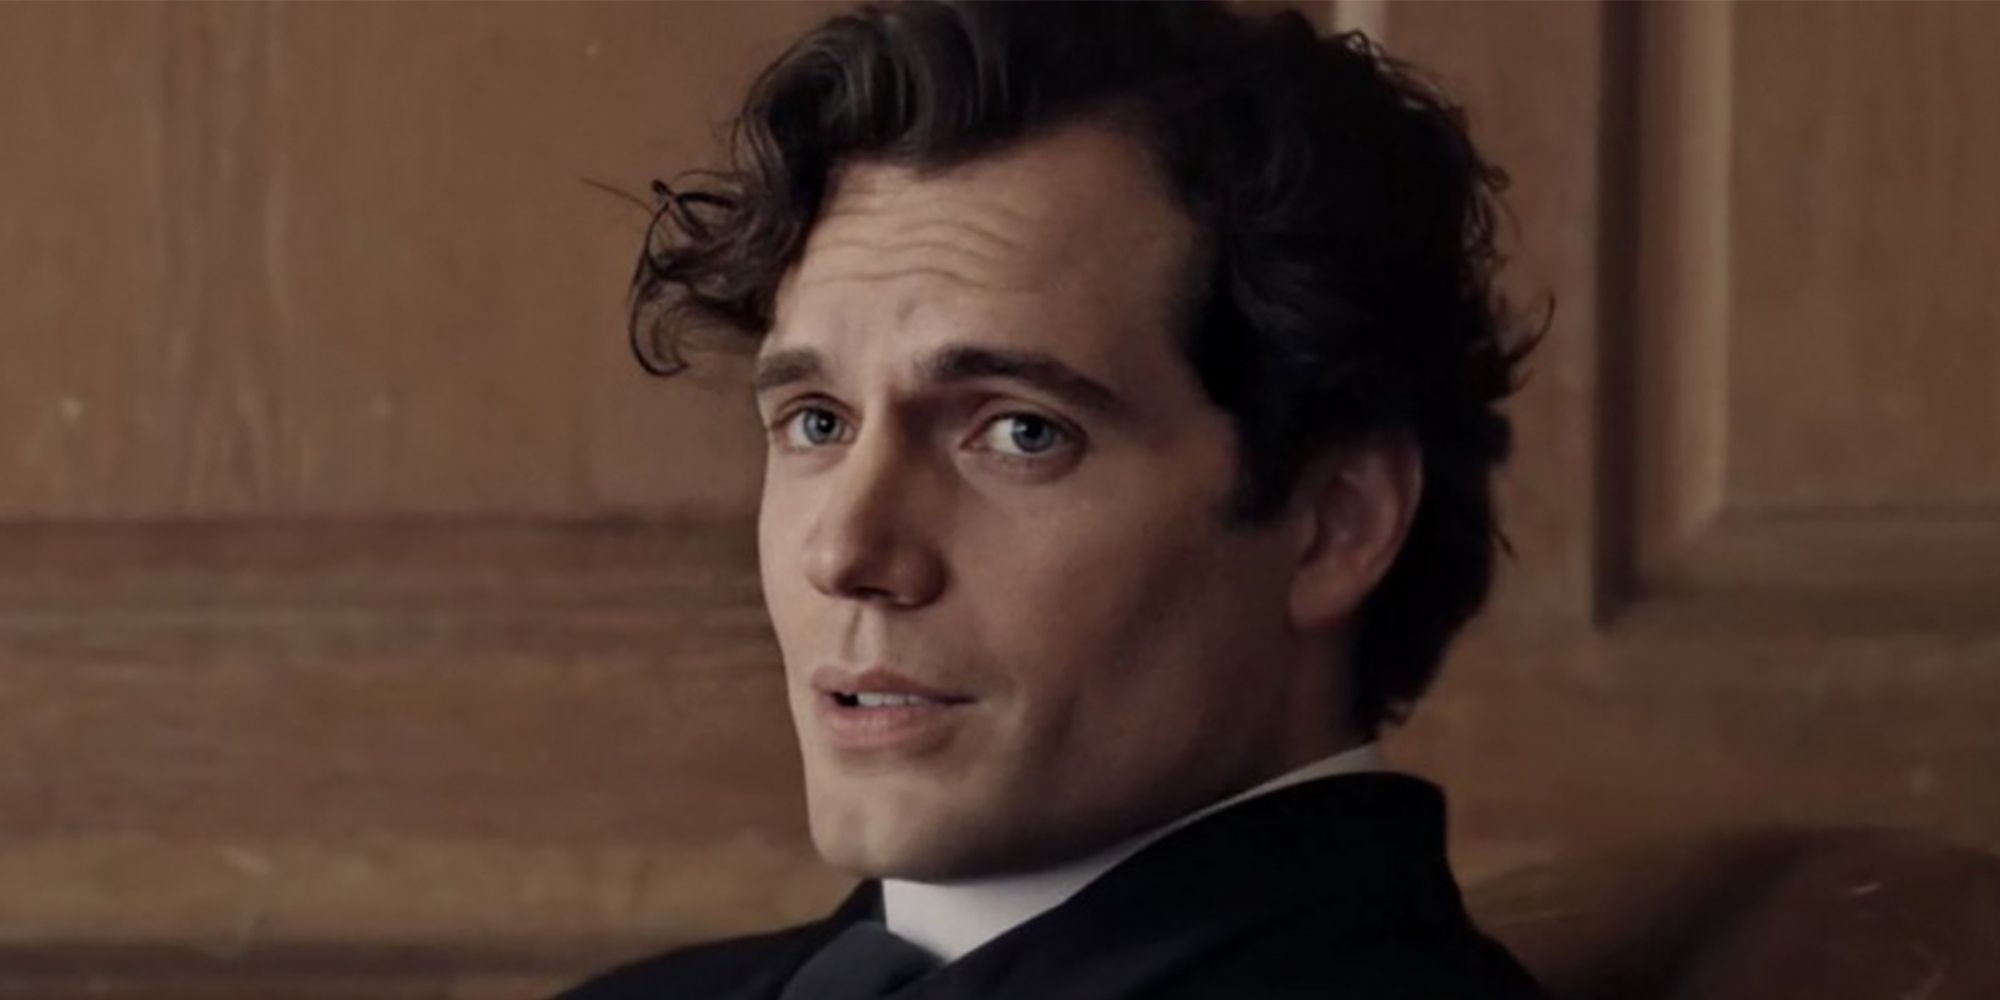 Henry Cavill to star in 'ungentlemanly' WWII Black Ops film